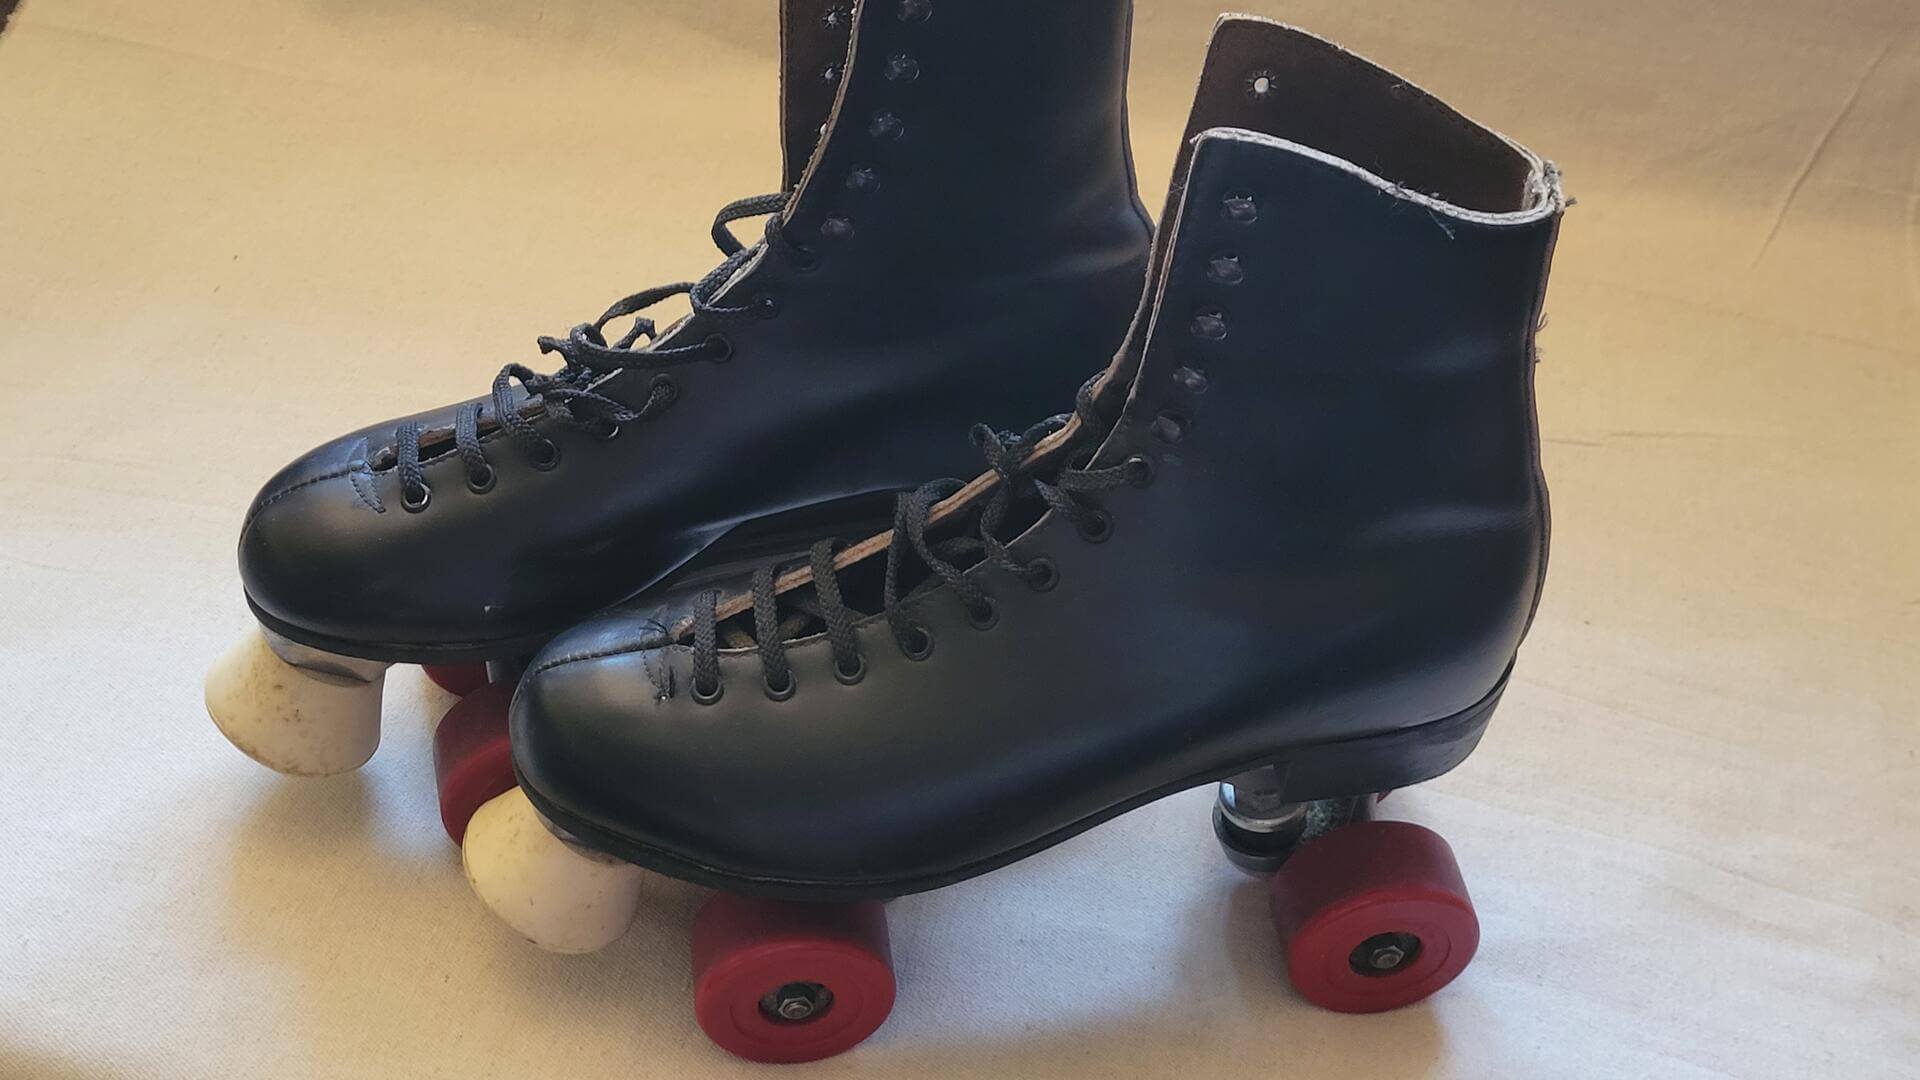 Beautiful vintage Dominion Marathon classic black leather roller skates with red wheels, white rubber brakes, and cast aluminum frame. This retro antique made in Canada collectible sports equipment and rollerskating memorabilia